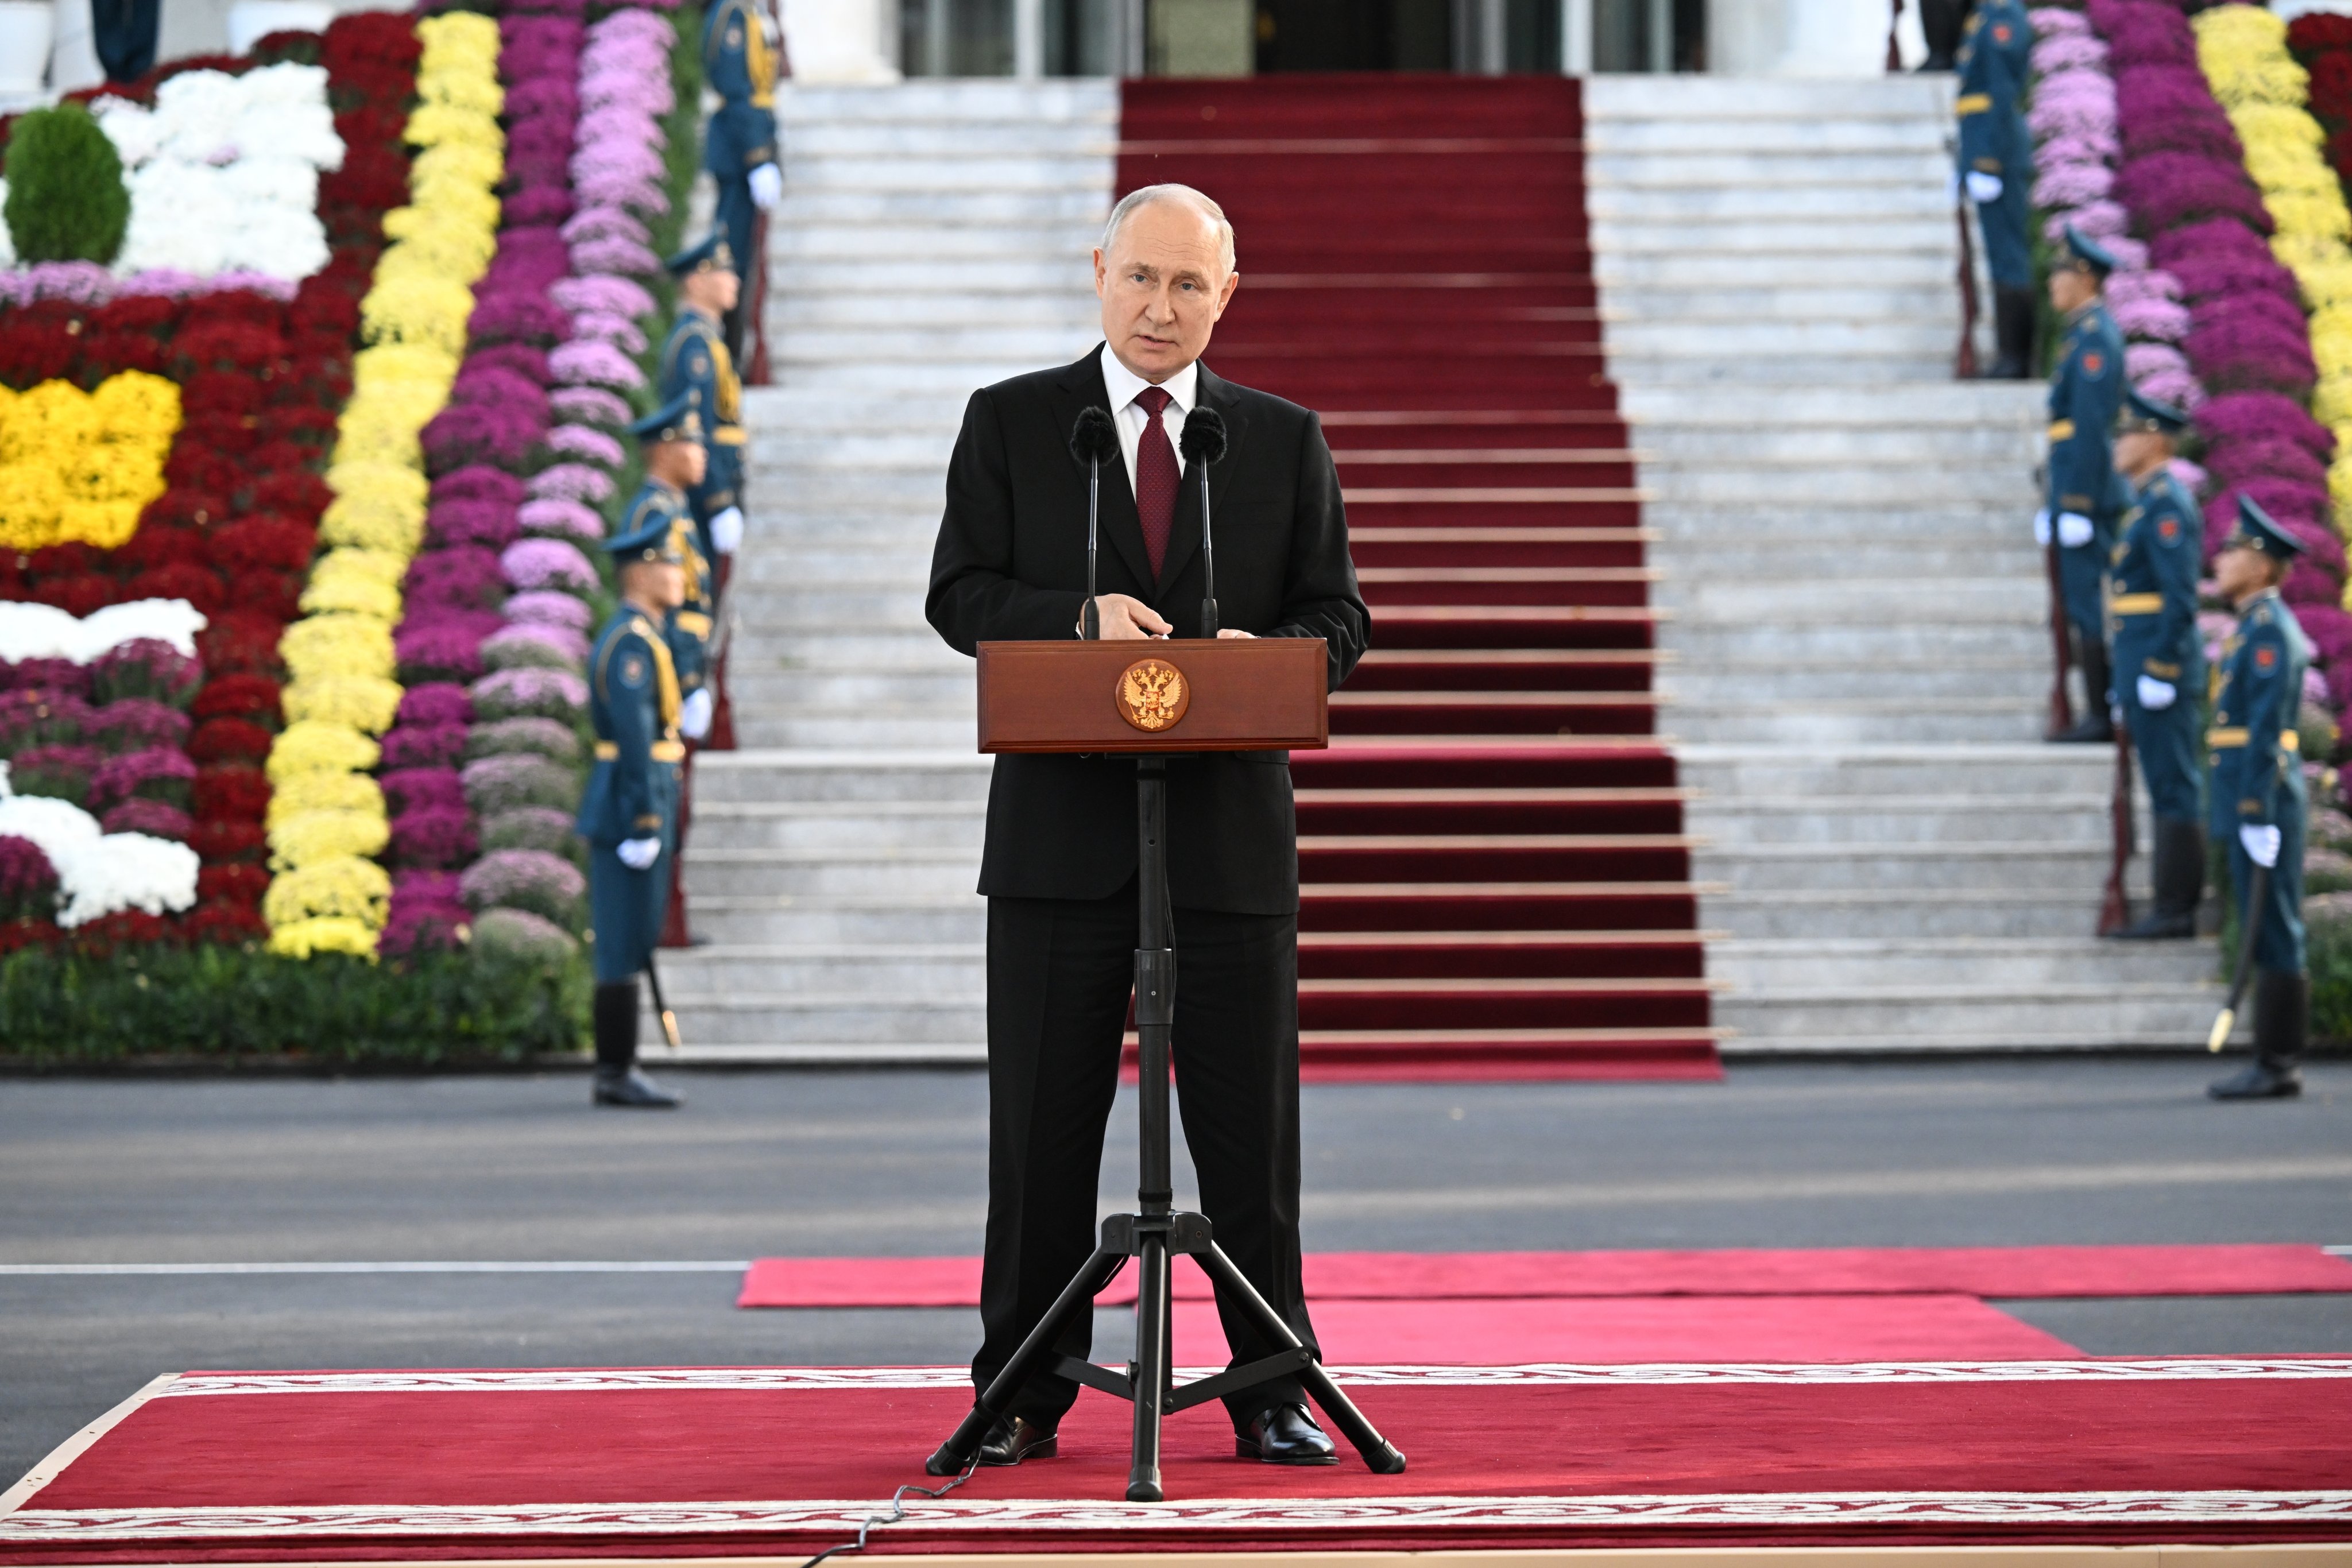 Russian President Vladimir Putin speaks in Kyrgyzstan, in his first foreign visit since the International Criminal Court issued an arrest warrant for him. Photo: via AP